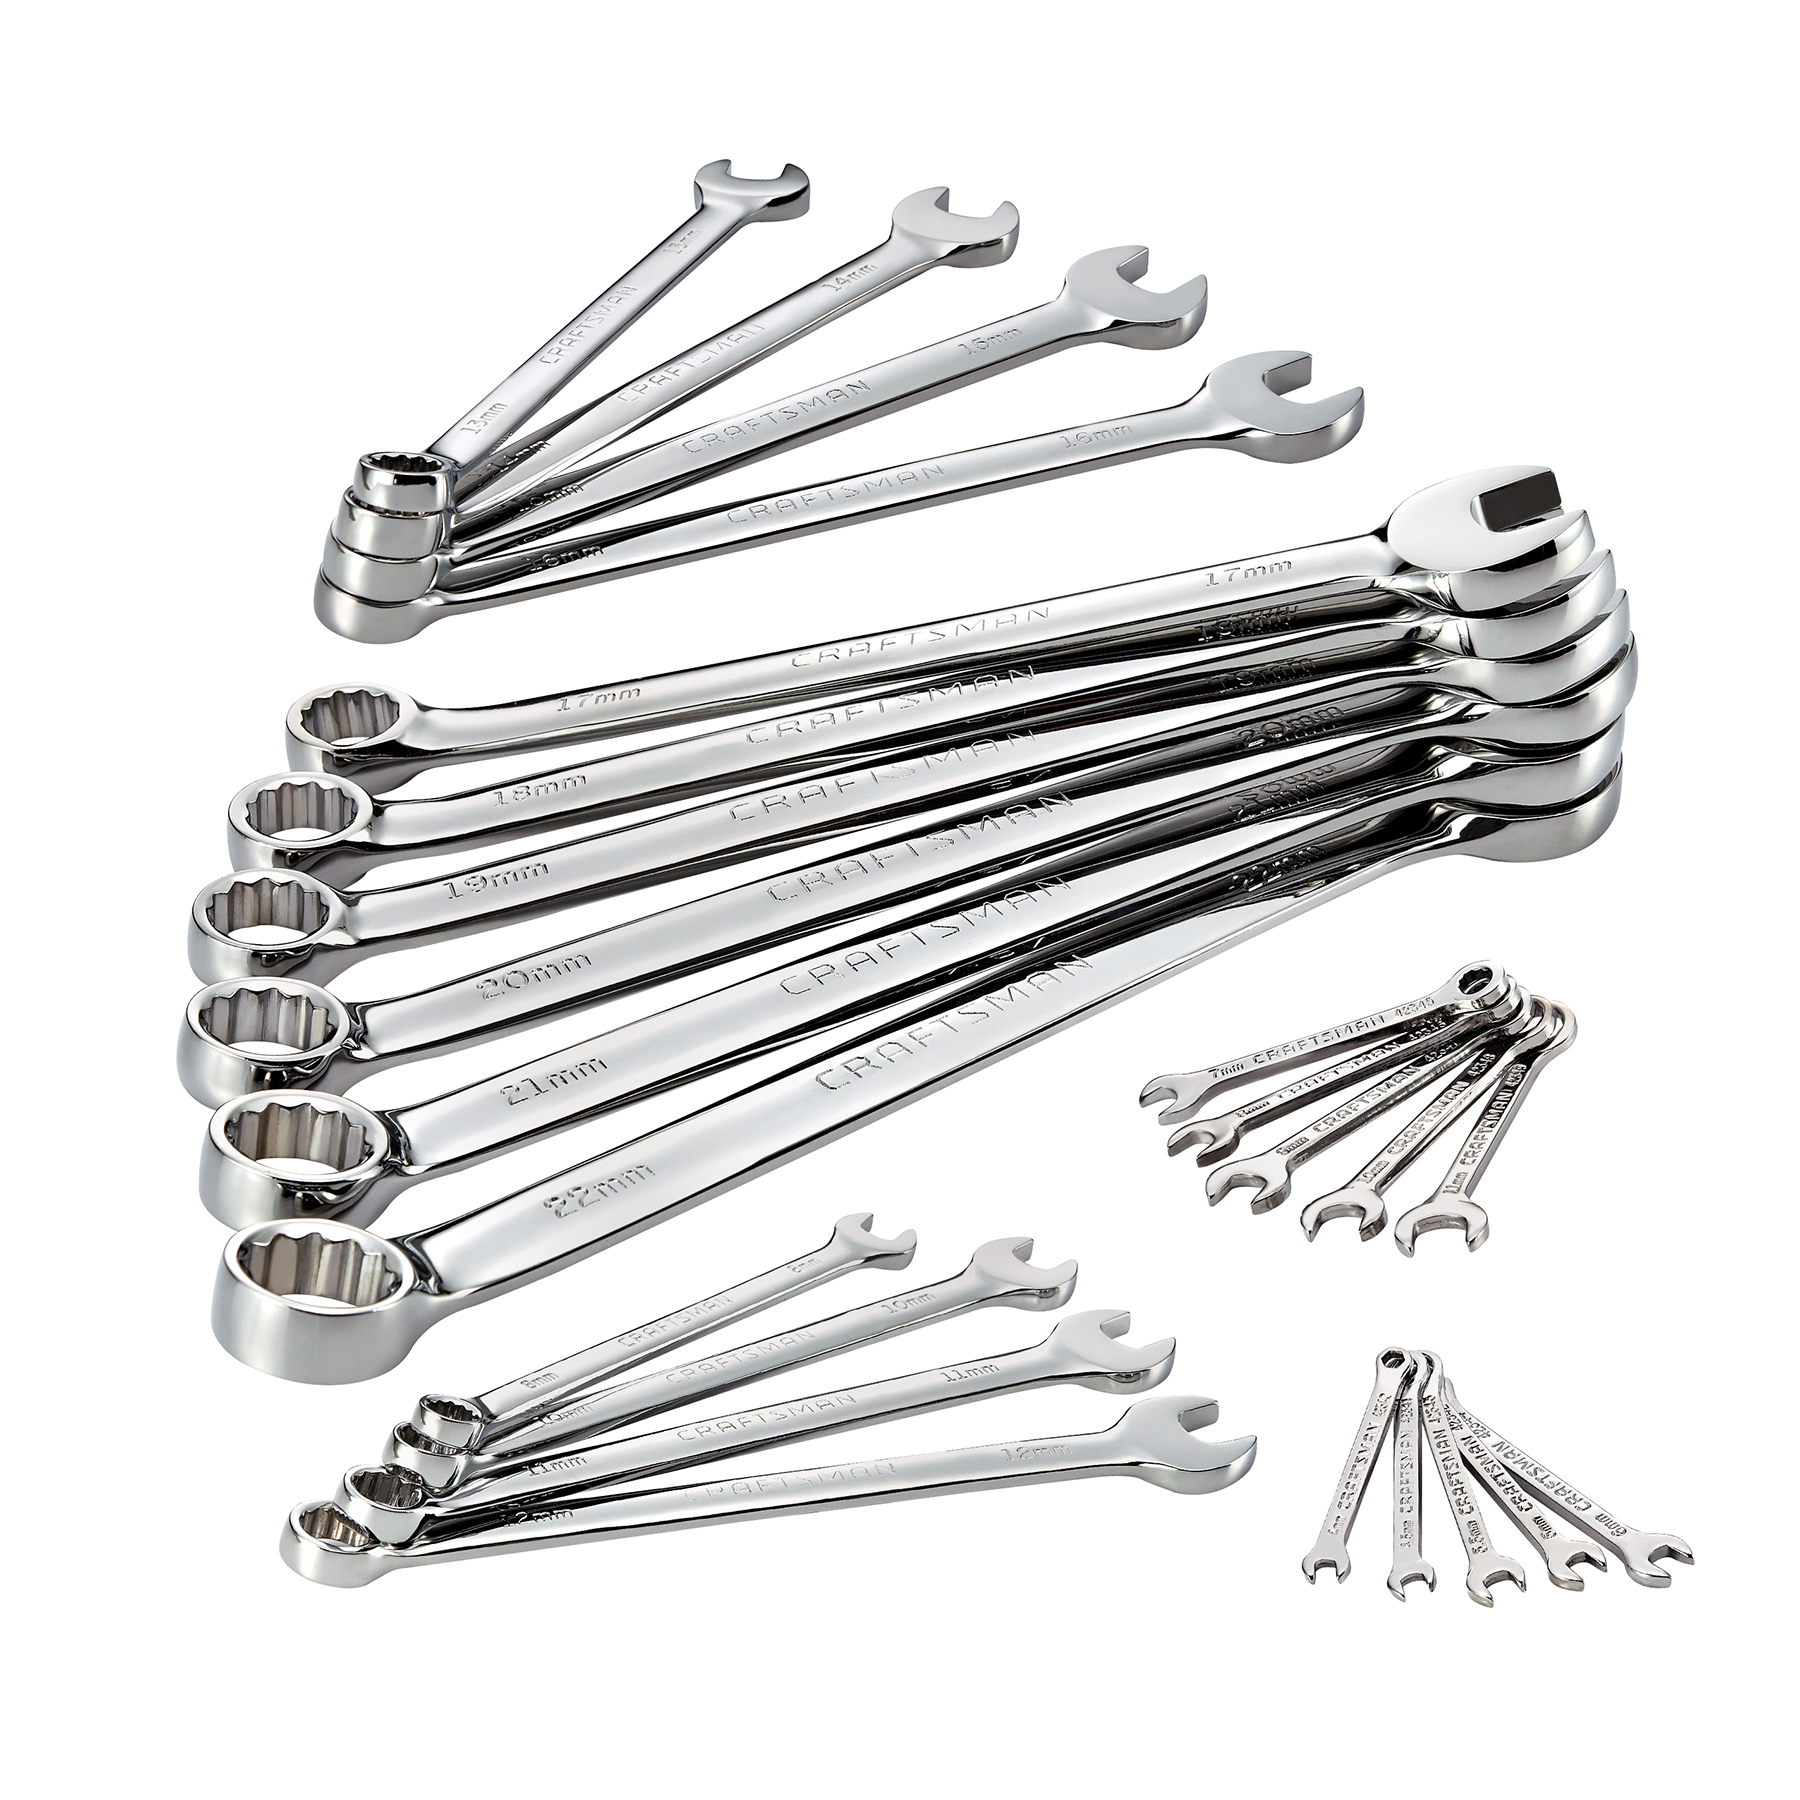 Craftsman Metric Wrench Set Top Sellers, 52% OFF | www.hcb.cat